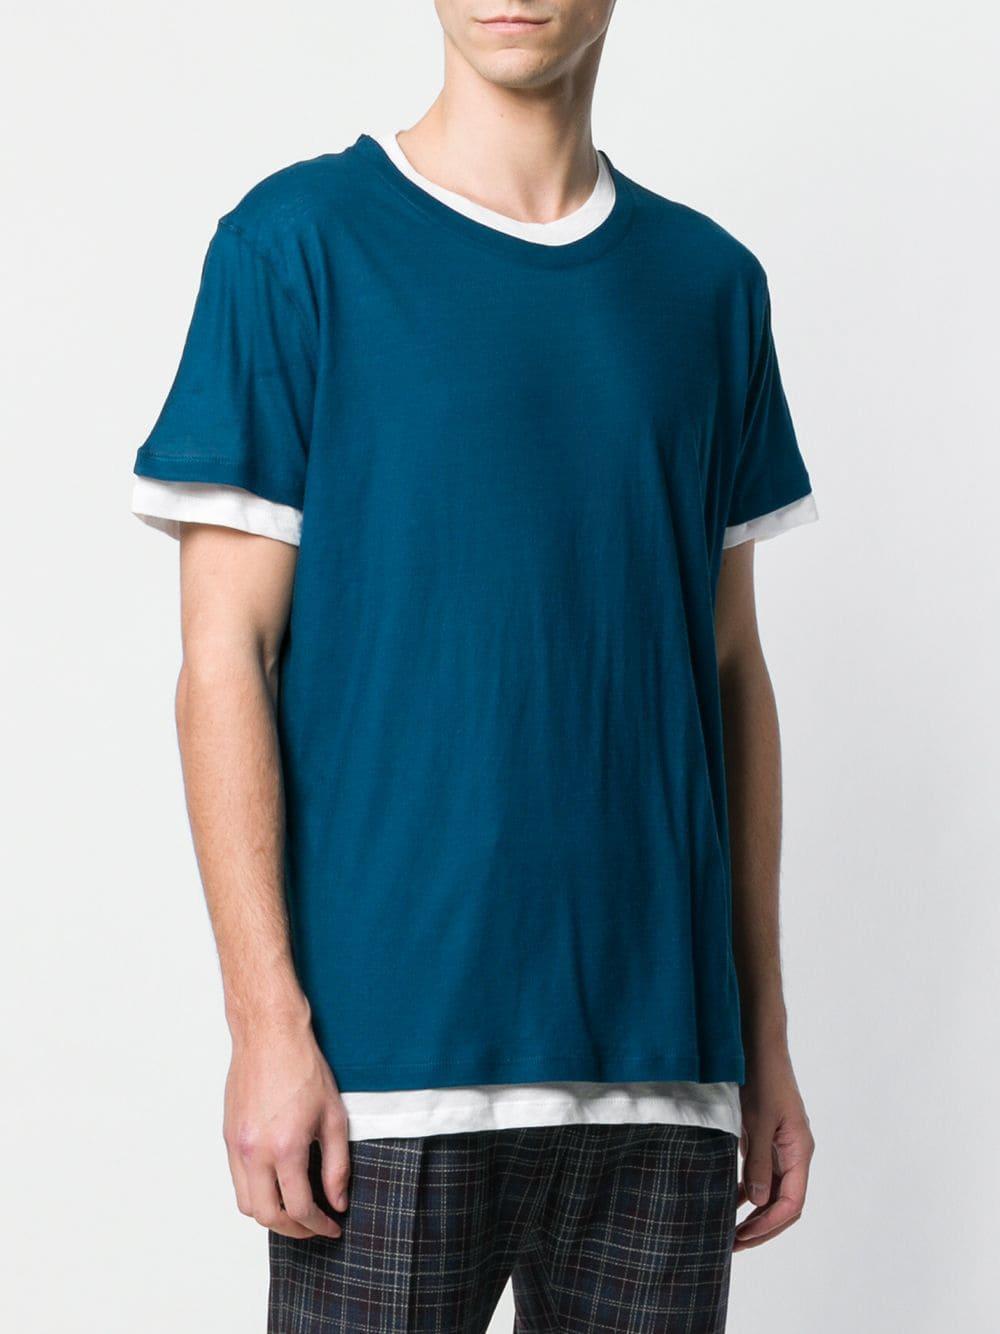 Majestic Filatures Layered Crew Neck T-shirt in Blue for Men - Lyst